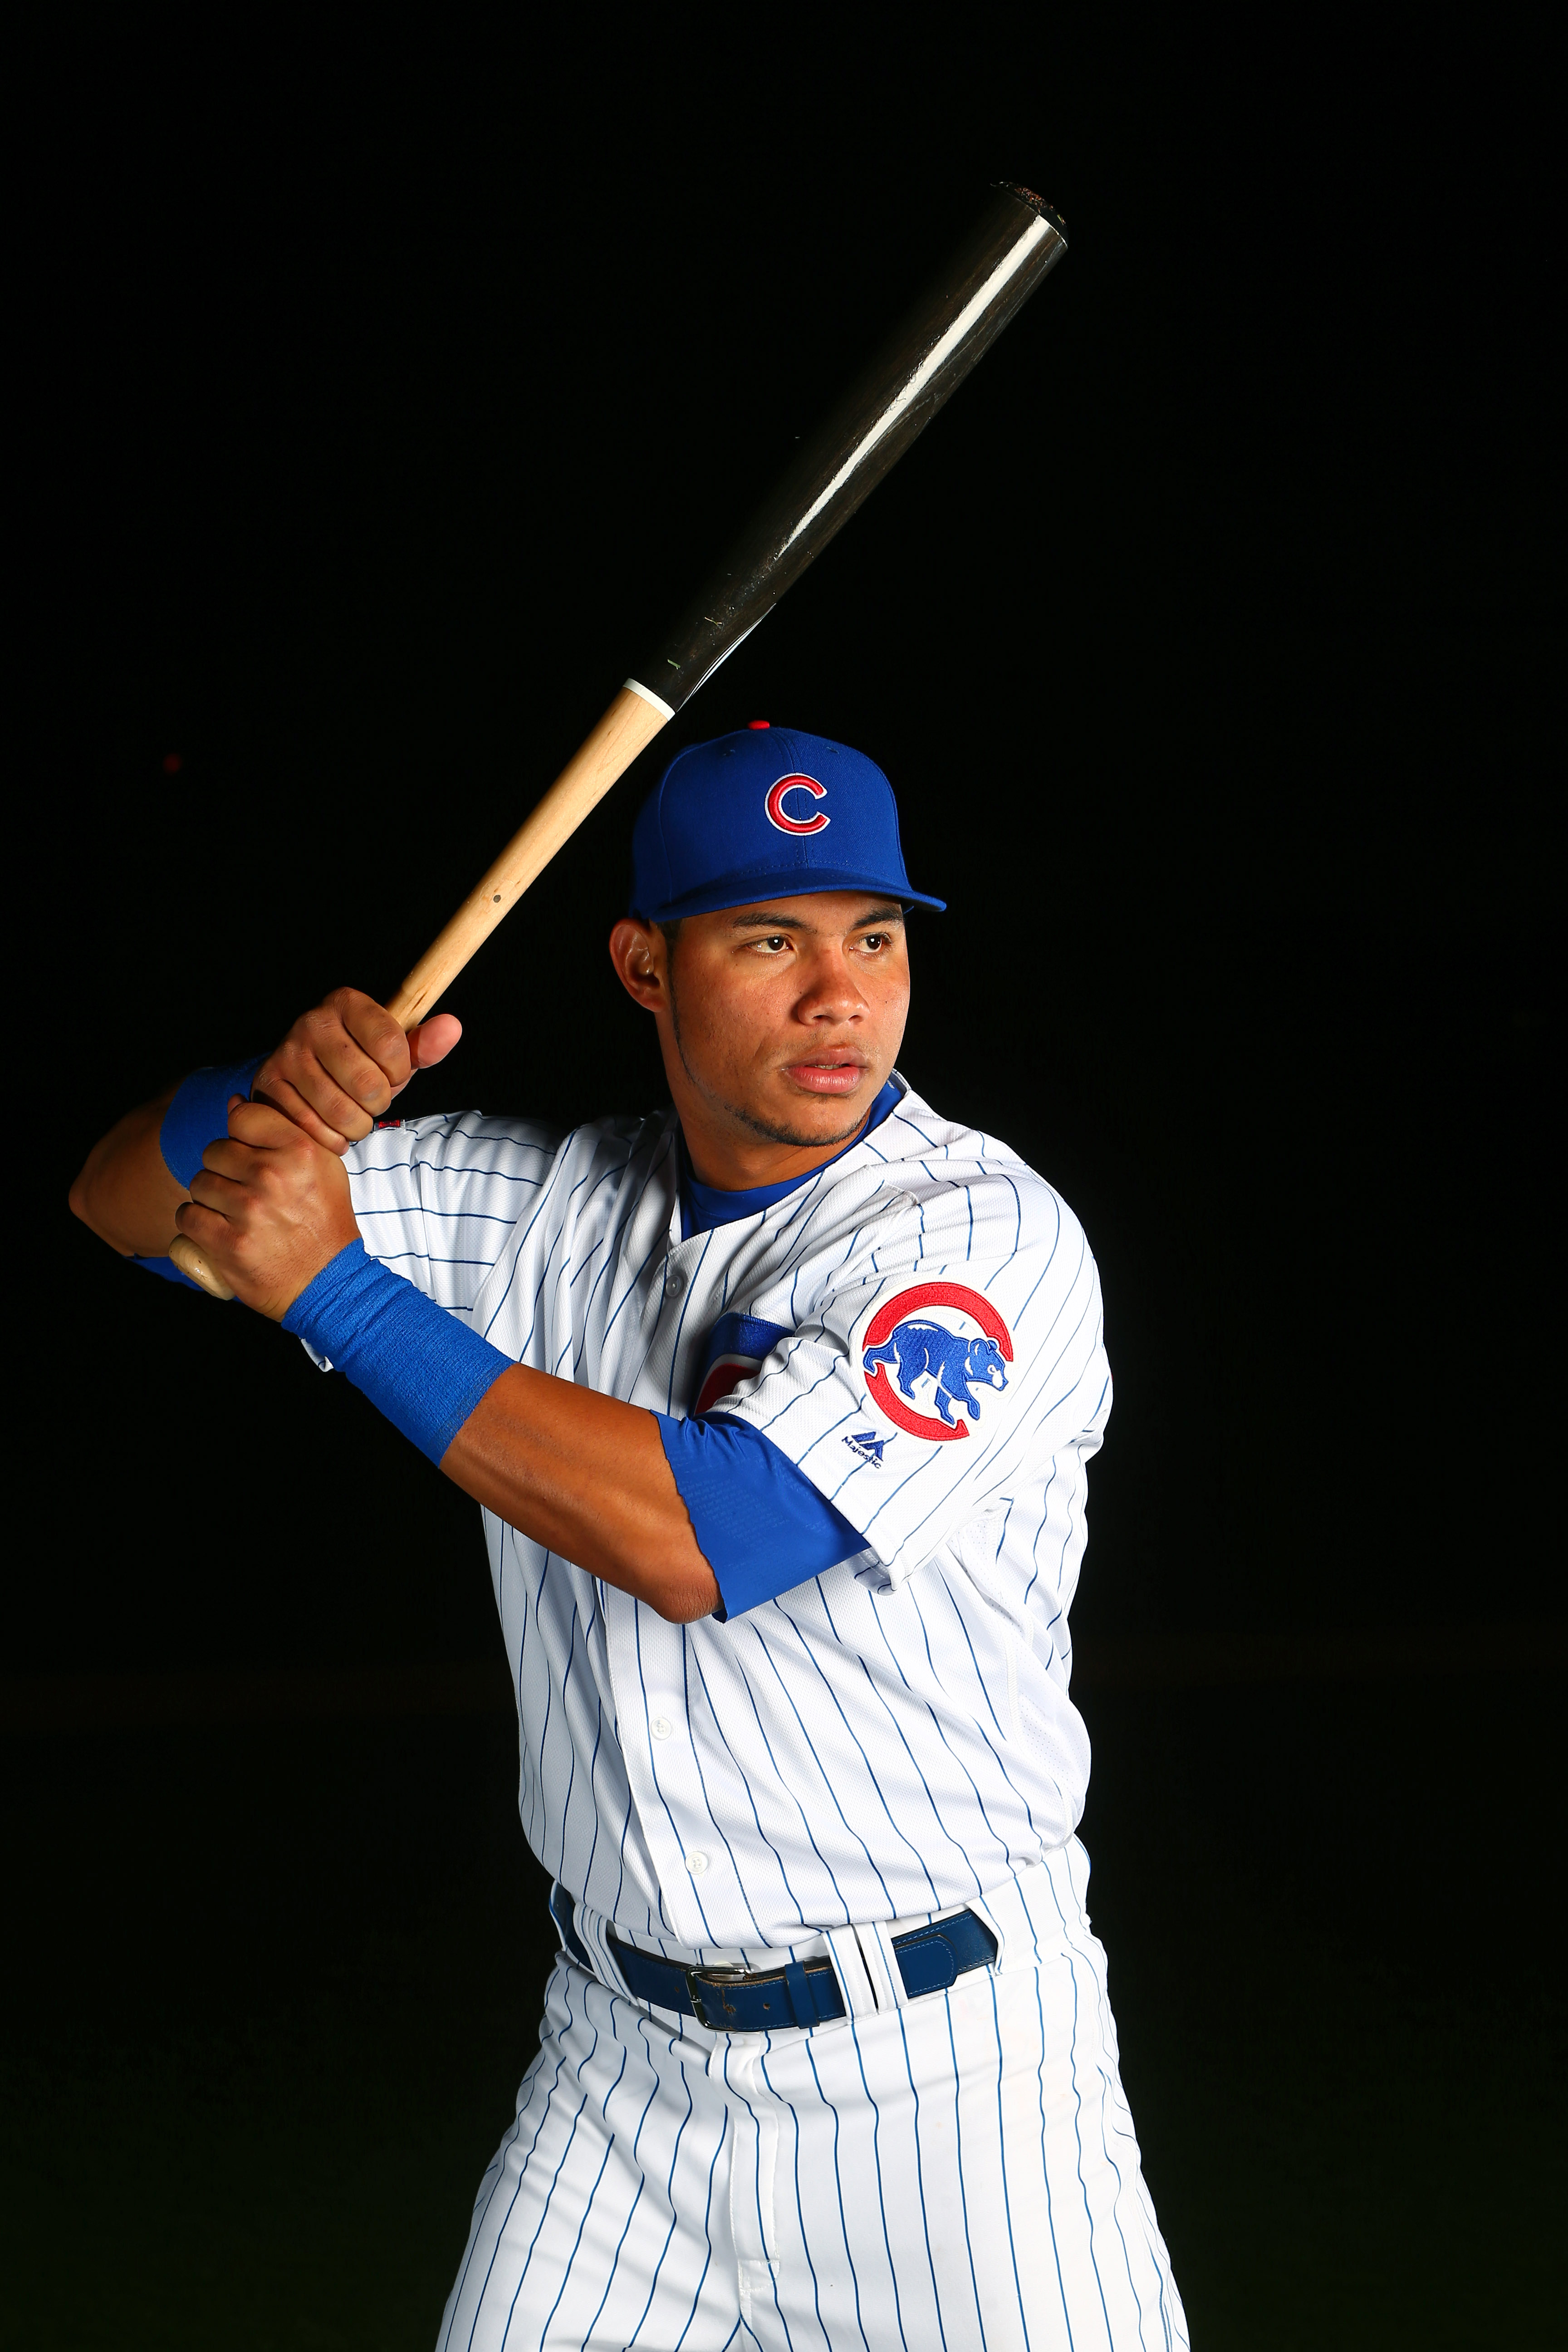 How Willson Contreras Can Improve on Below-Average Framing Numbers